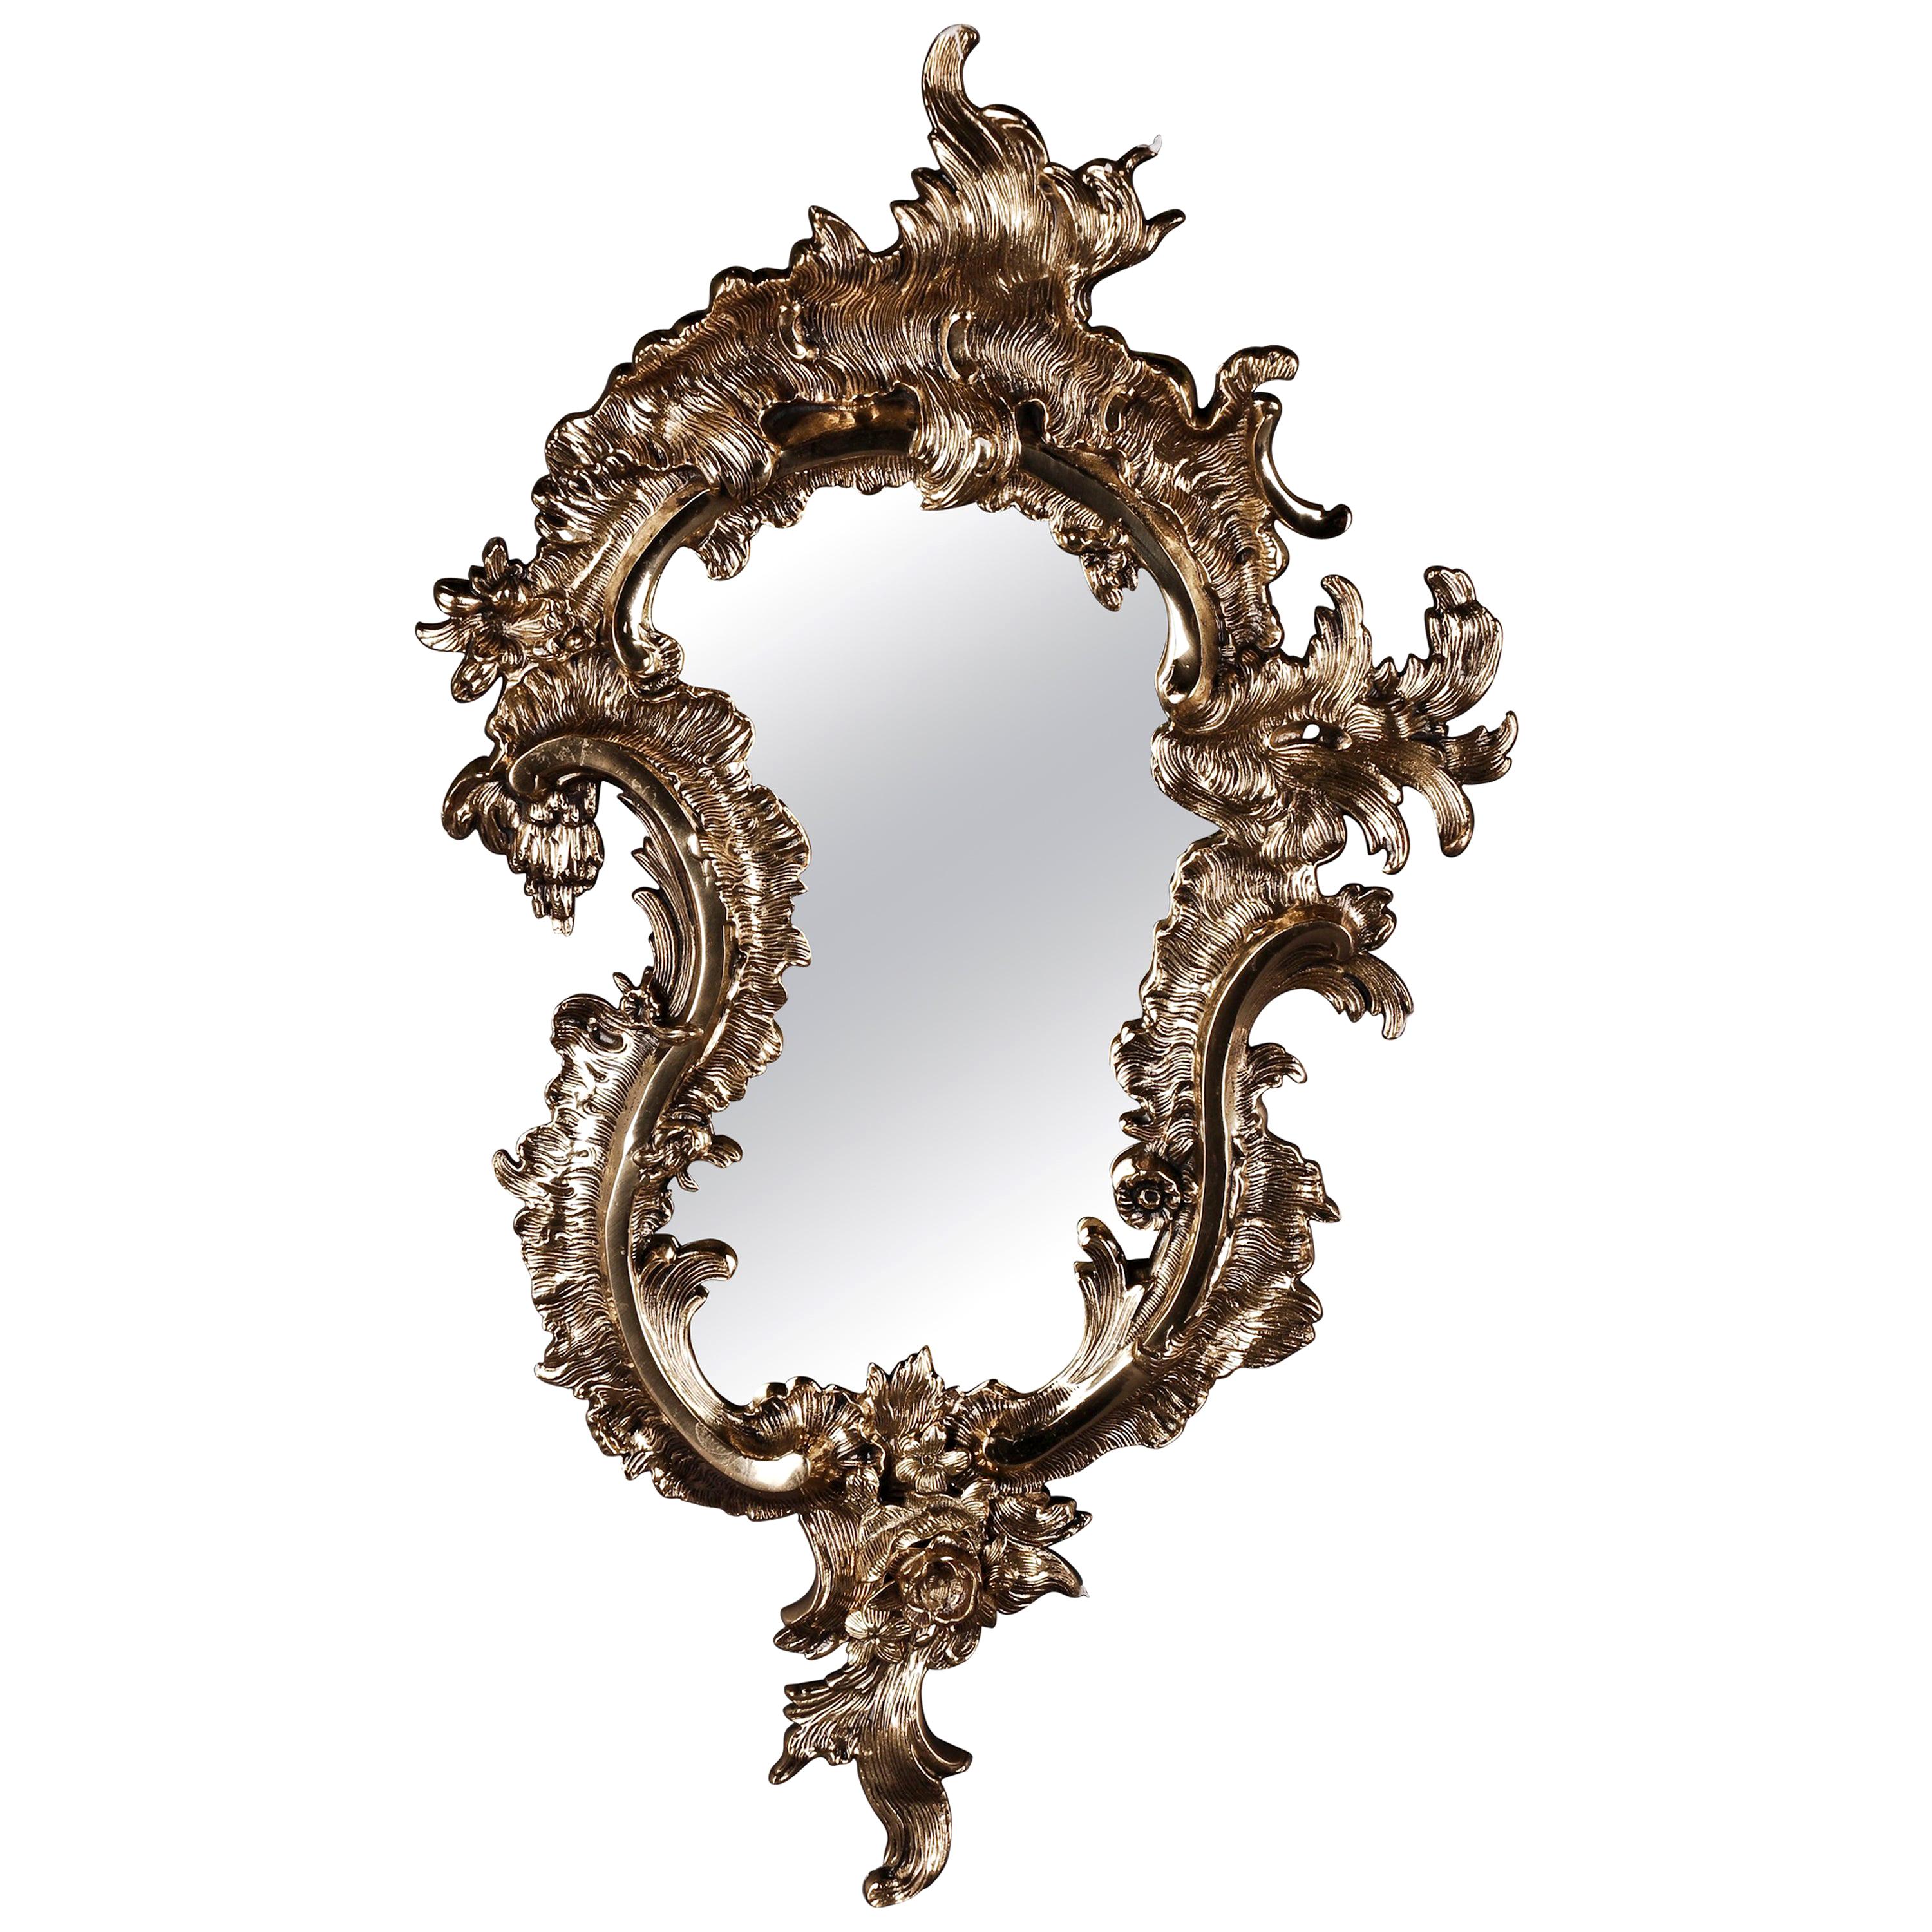 20th Century Rococo Style Rocaille-Formed Wall Mirror